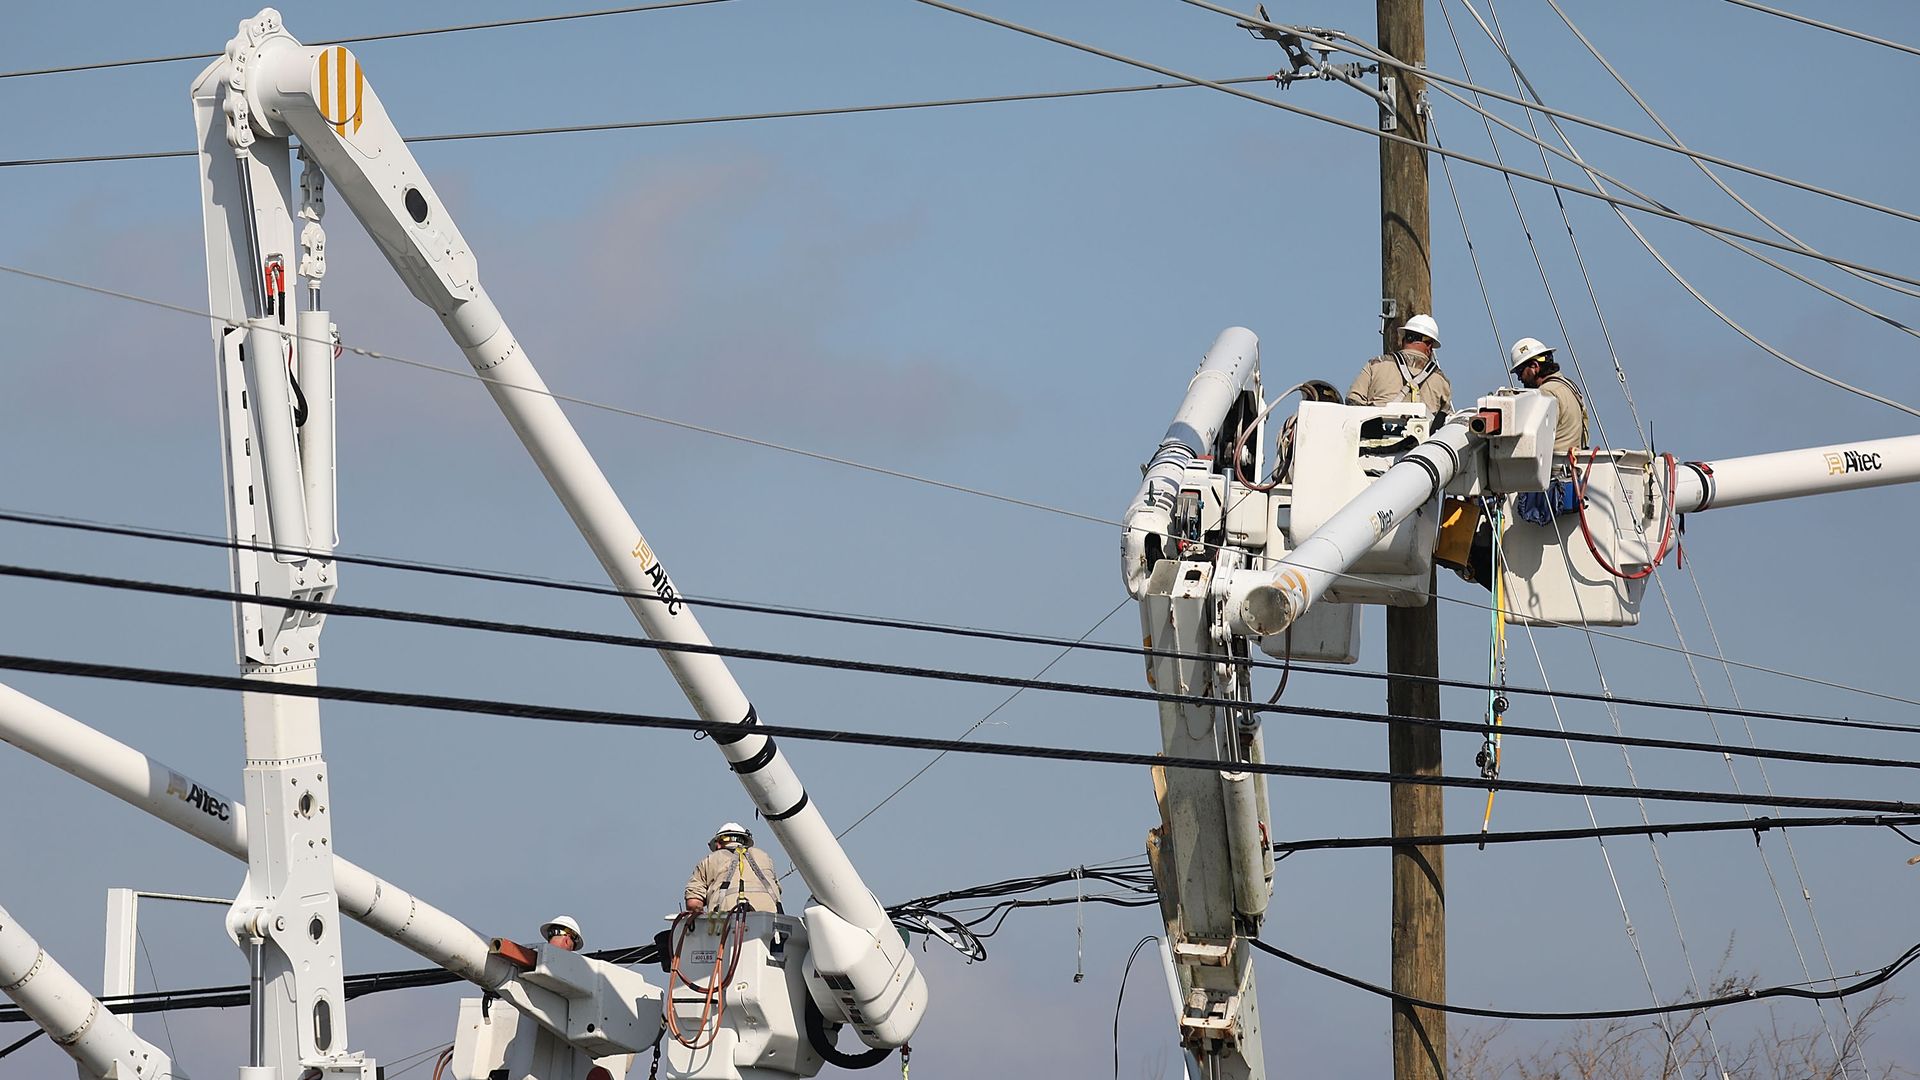 electric workers repair aboveground power lines